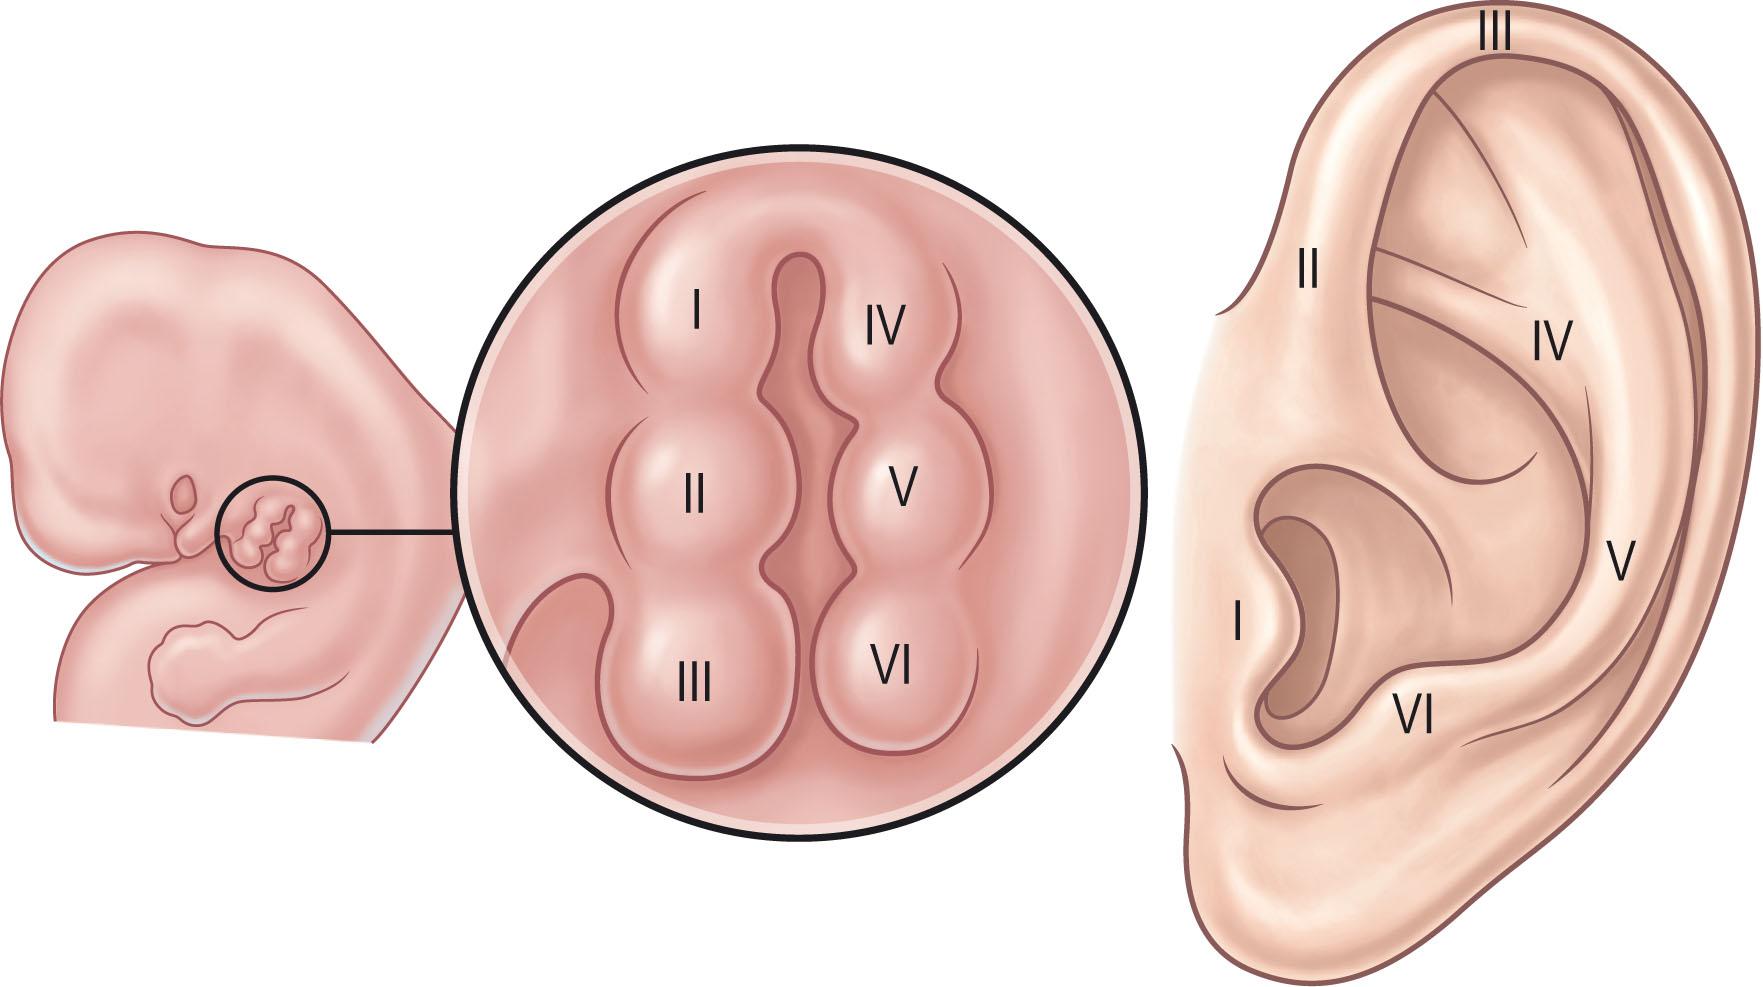 Figure 4.1, Development of the auricle in a 5-week human embryo: I–VI, elevations (hillocks) on the mandibular and hyoid arches.